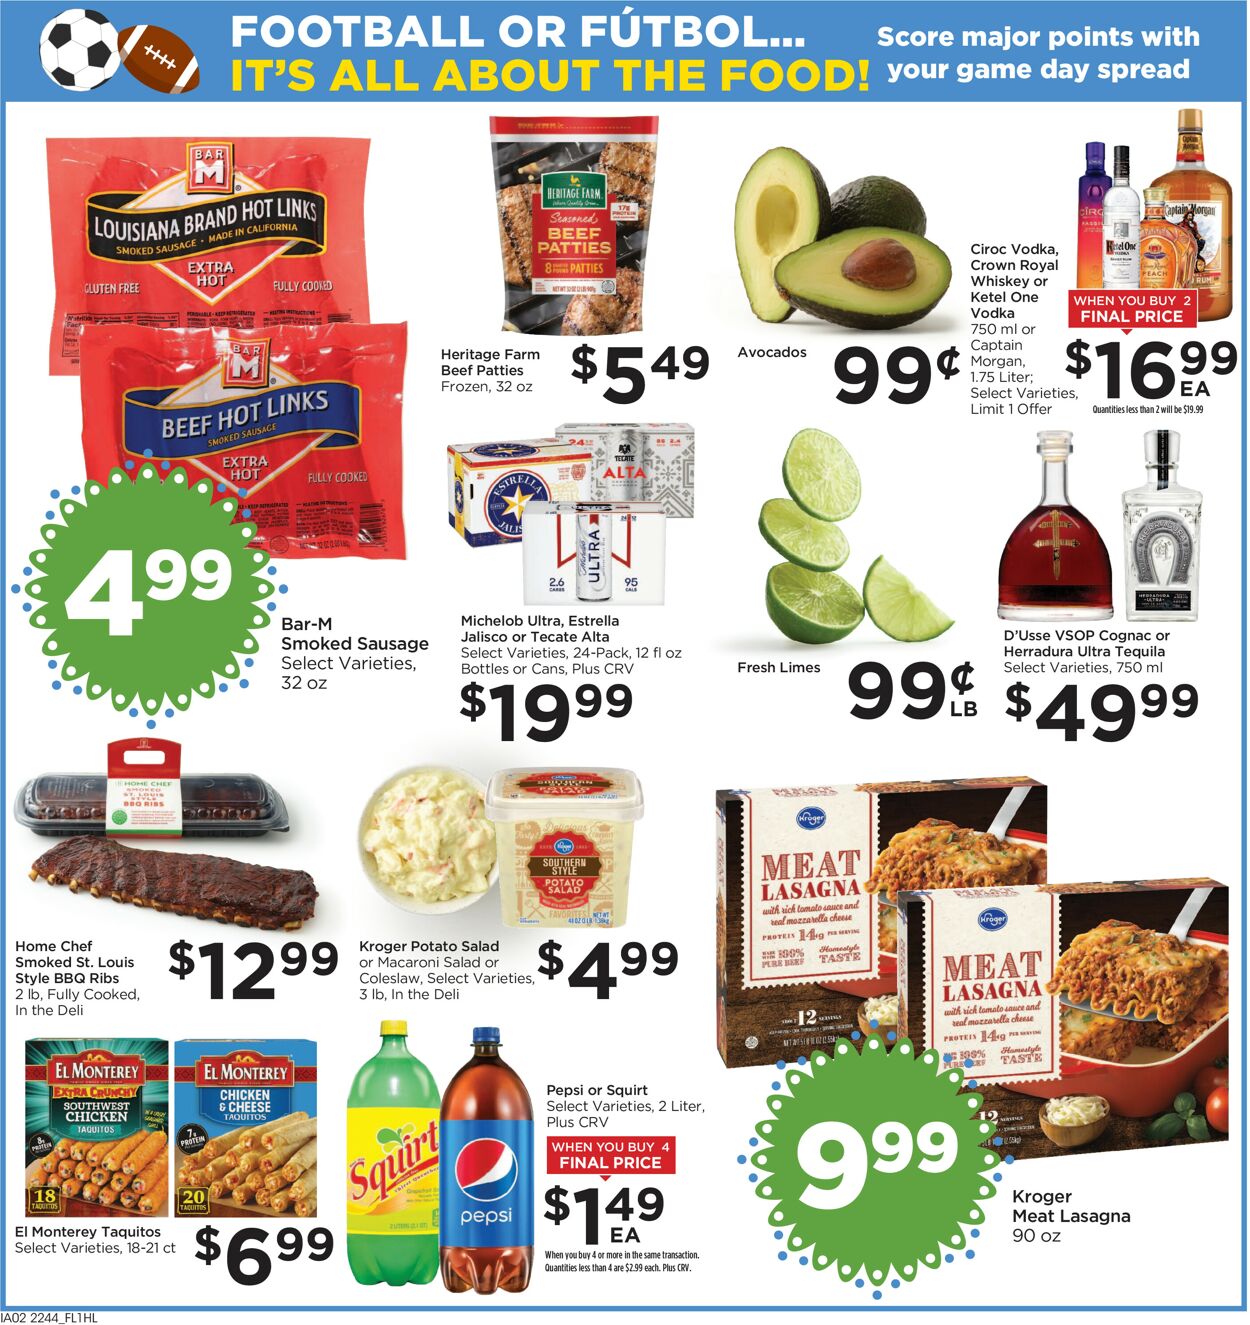 Catalogue Food 4 Less from 11/30/2022